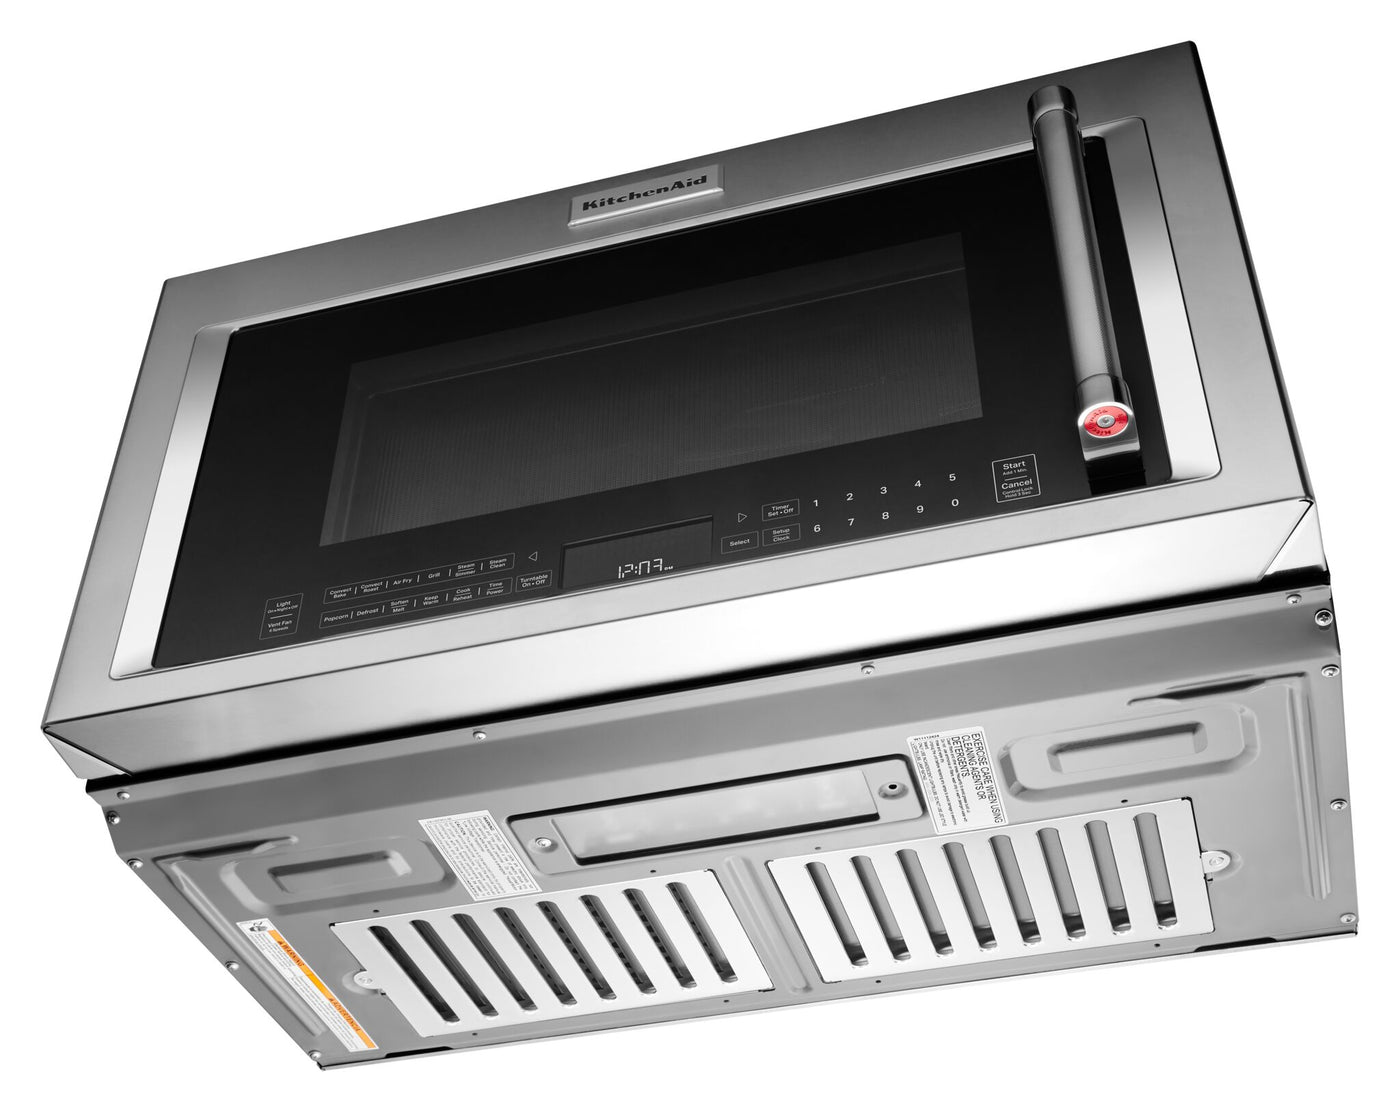 KitchenAid PrintShield Stainless Over-the-Range Microwave (1.90 Cu Ft) - YKMHC319LPS